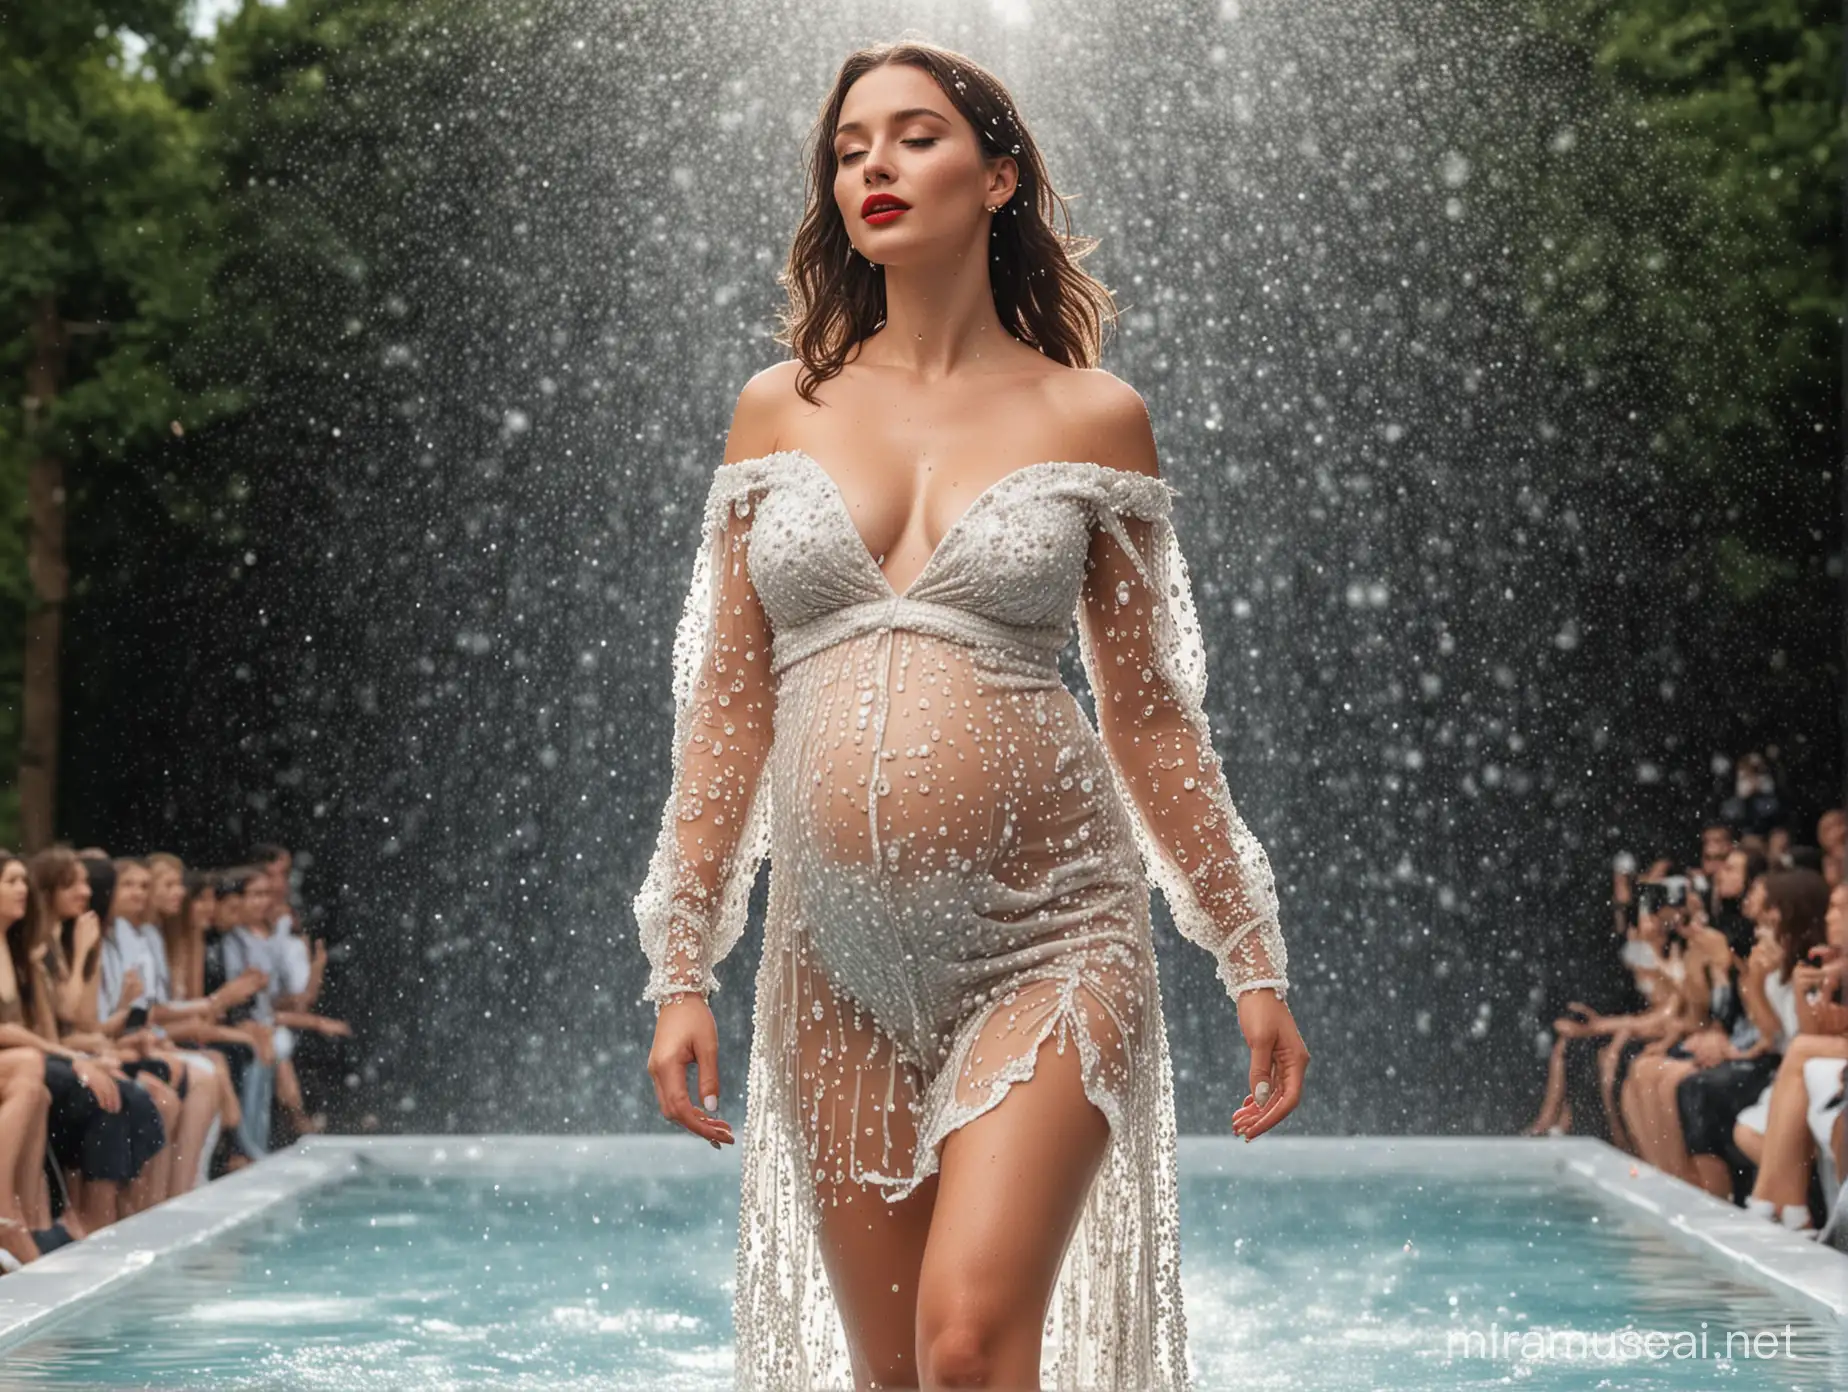 Full body shot of a woman in stunning haute couture, summer daytime, woman is pregnant,
lipstick, water drops on the face, photography on the stage of a fashion event